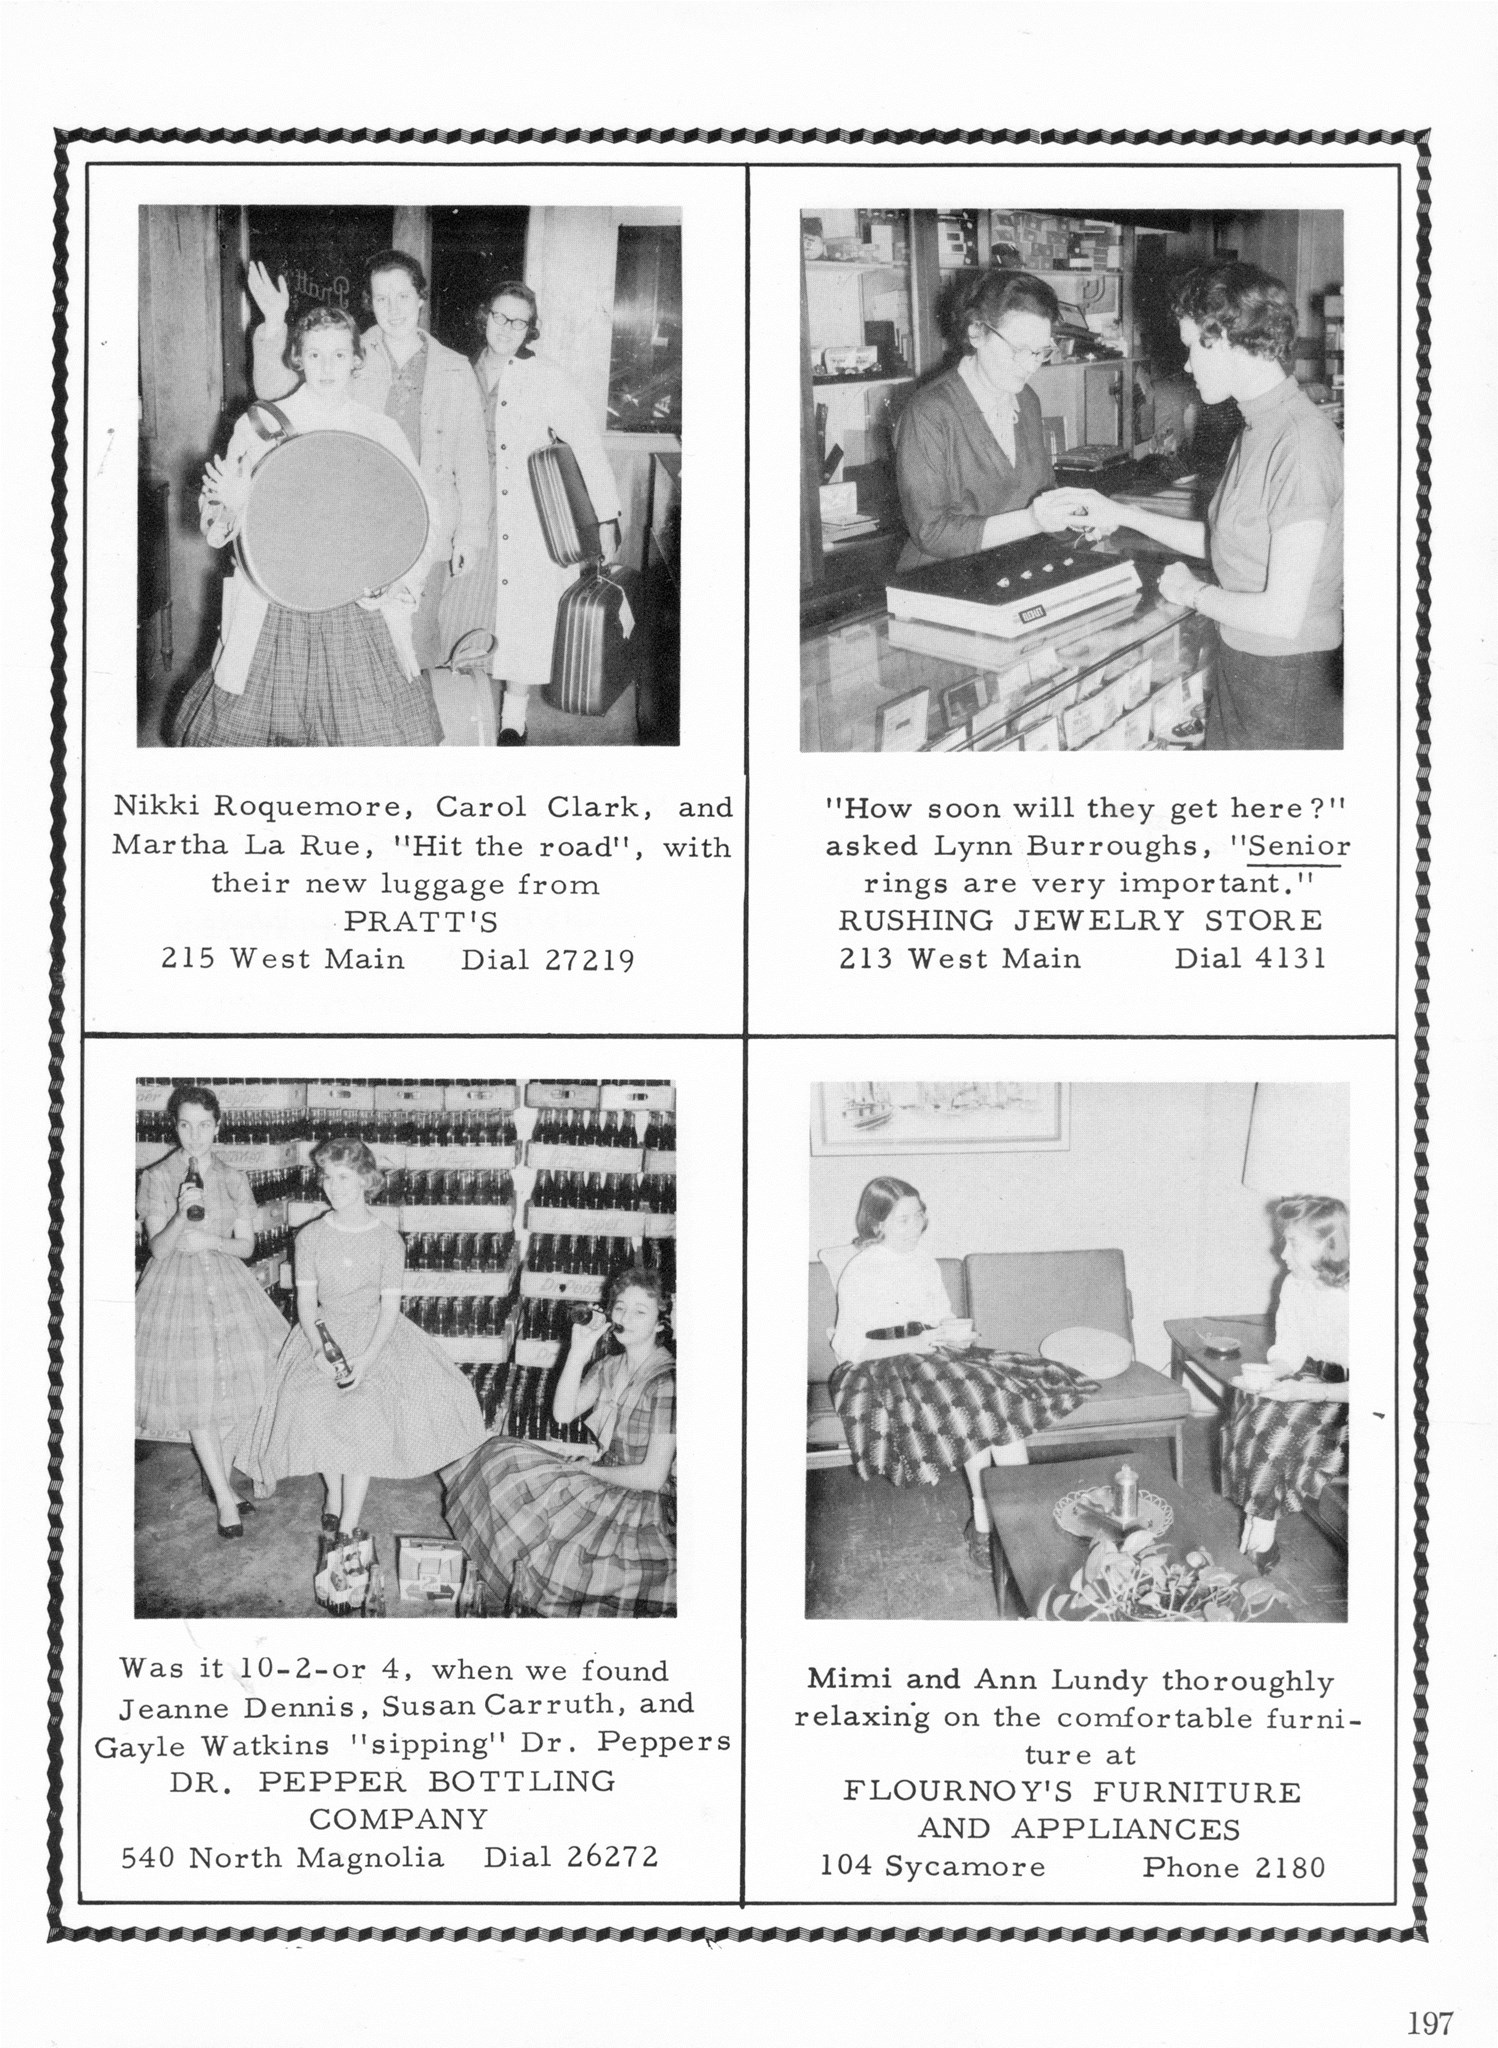 ../../../Images/Large/1959/Arclight-1959-pg0197.jpg